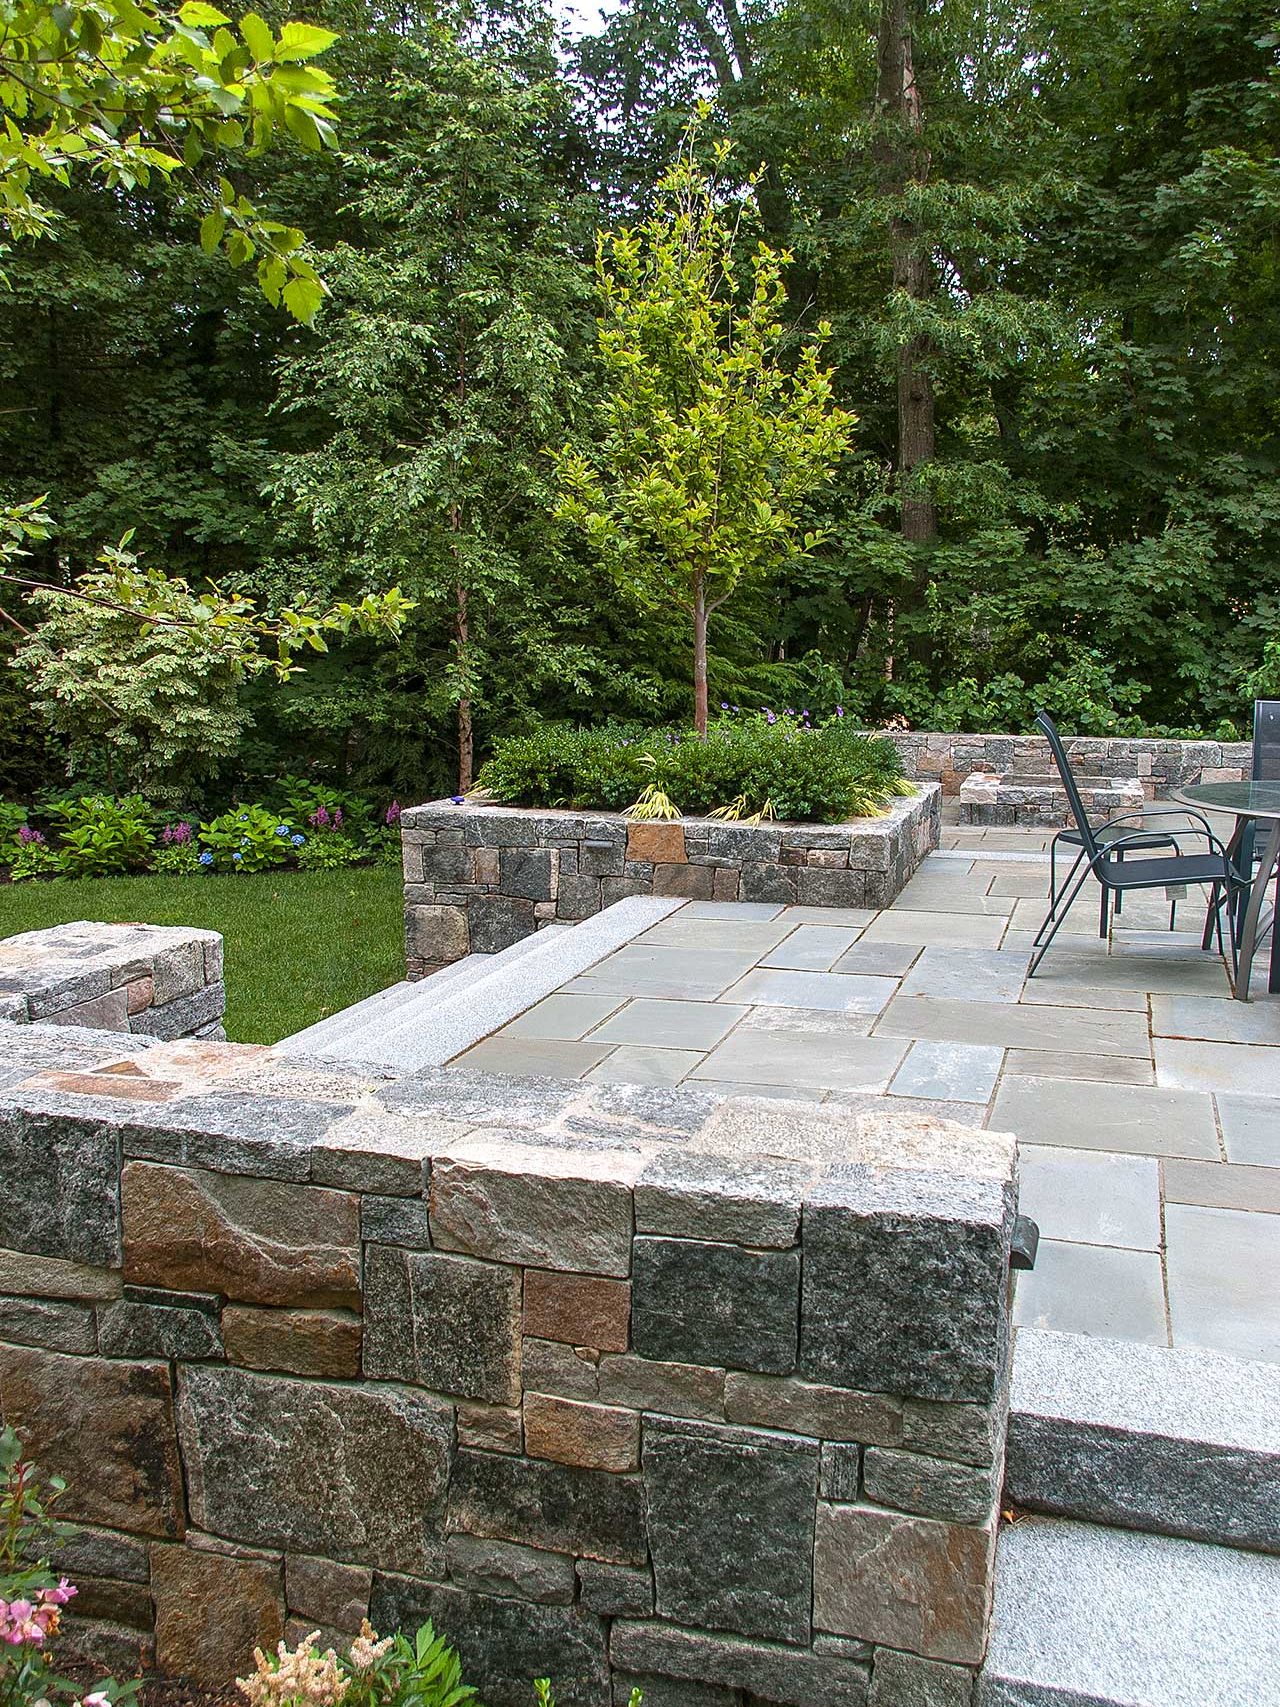 Wellesley, MA - The heavily vegetated border provides ample screening for the bluestone terraced patio.